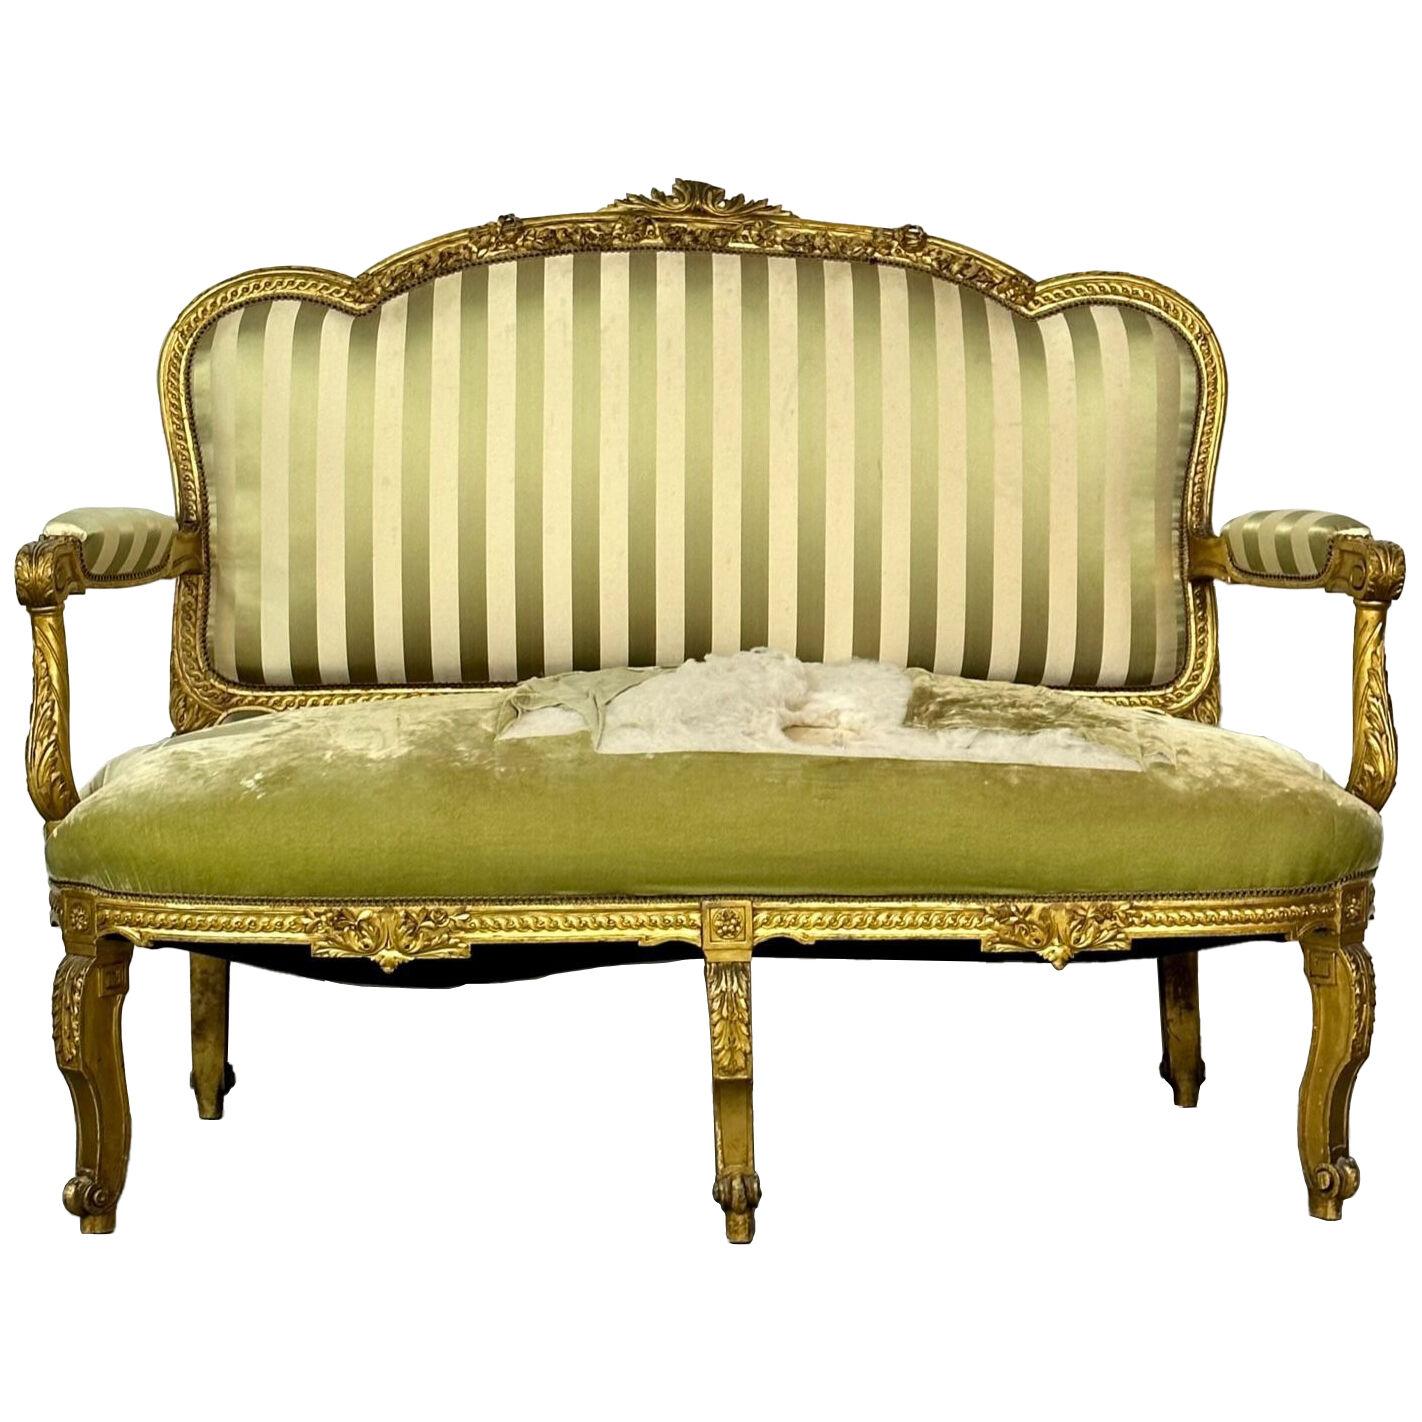 Giltwood Settee, Canape Louis XV, Durand, 19th Century, Solid Wood